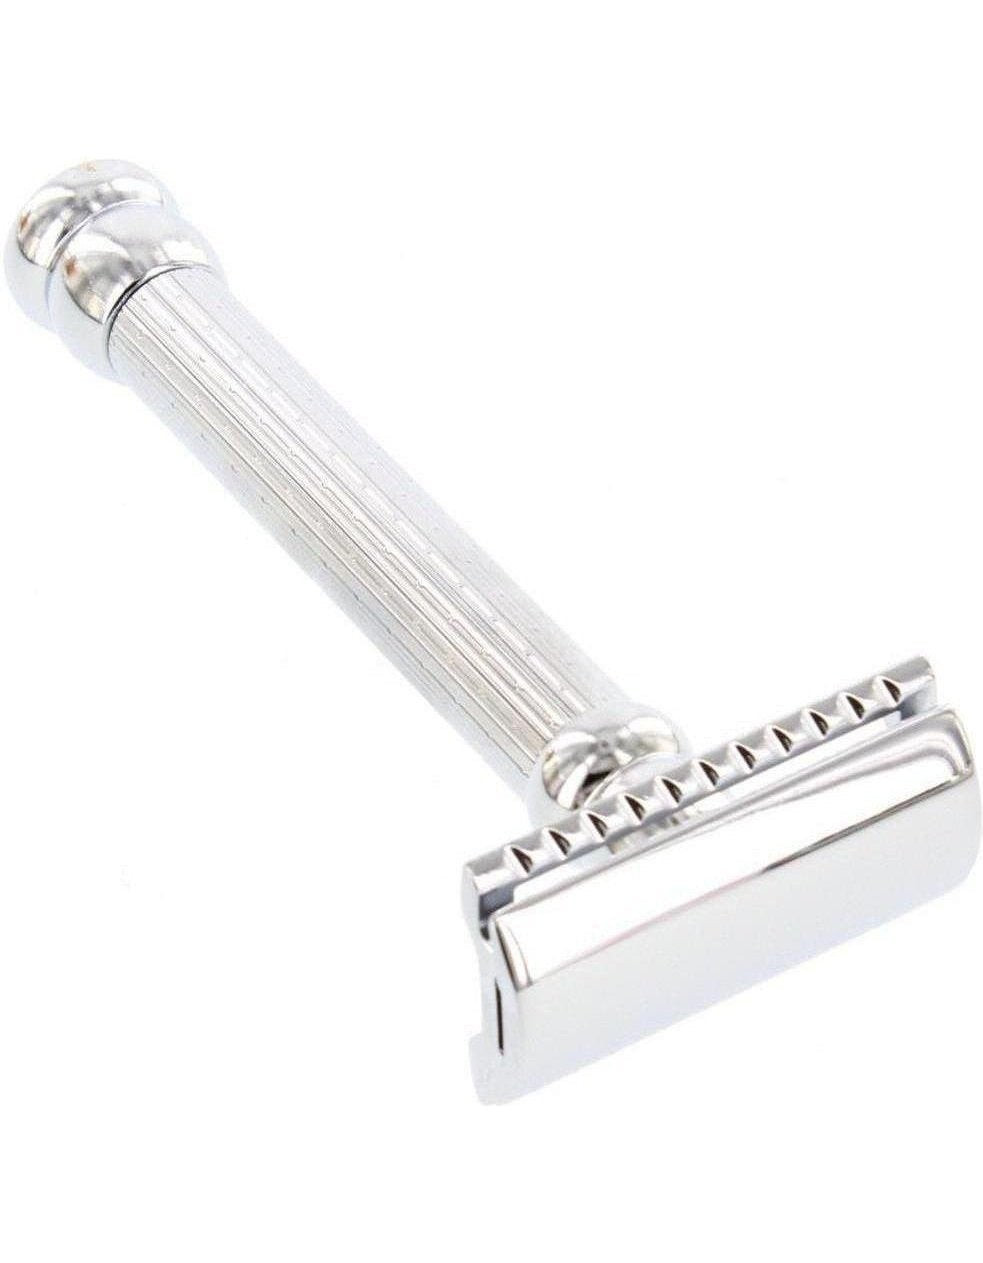 Product image 0 for Merkur 47C Safety Razor with Long Handle, Chrome